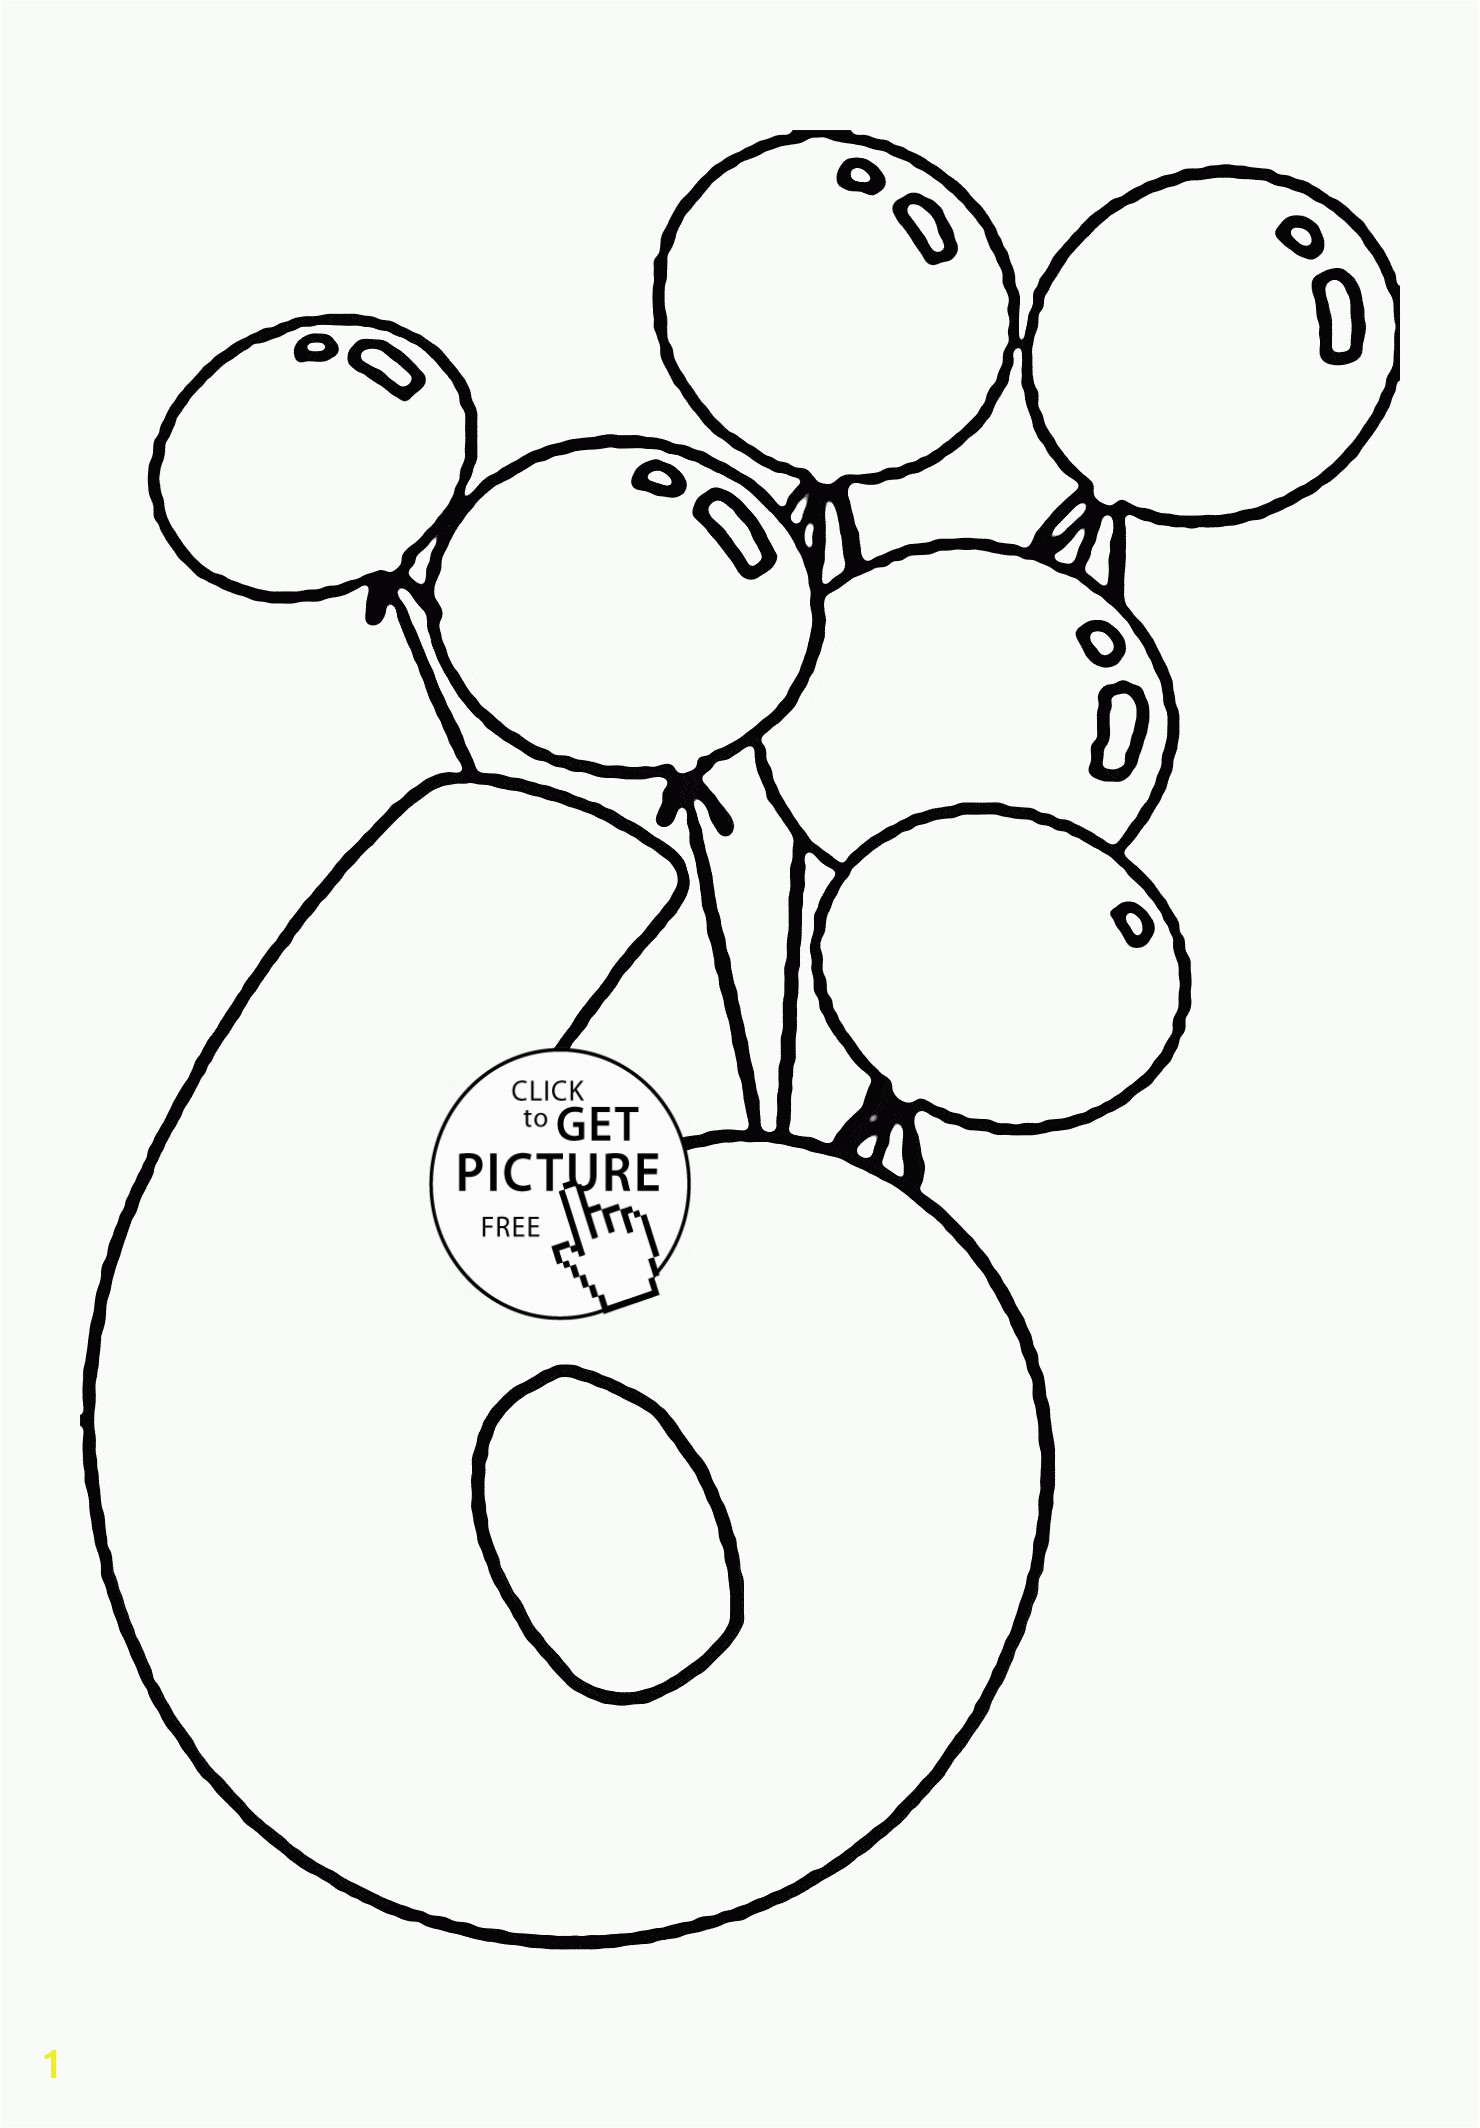 Number 6 and Birthday Balloons coloring page for kids holiday coloring pages printables free